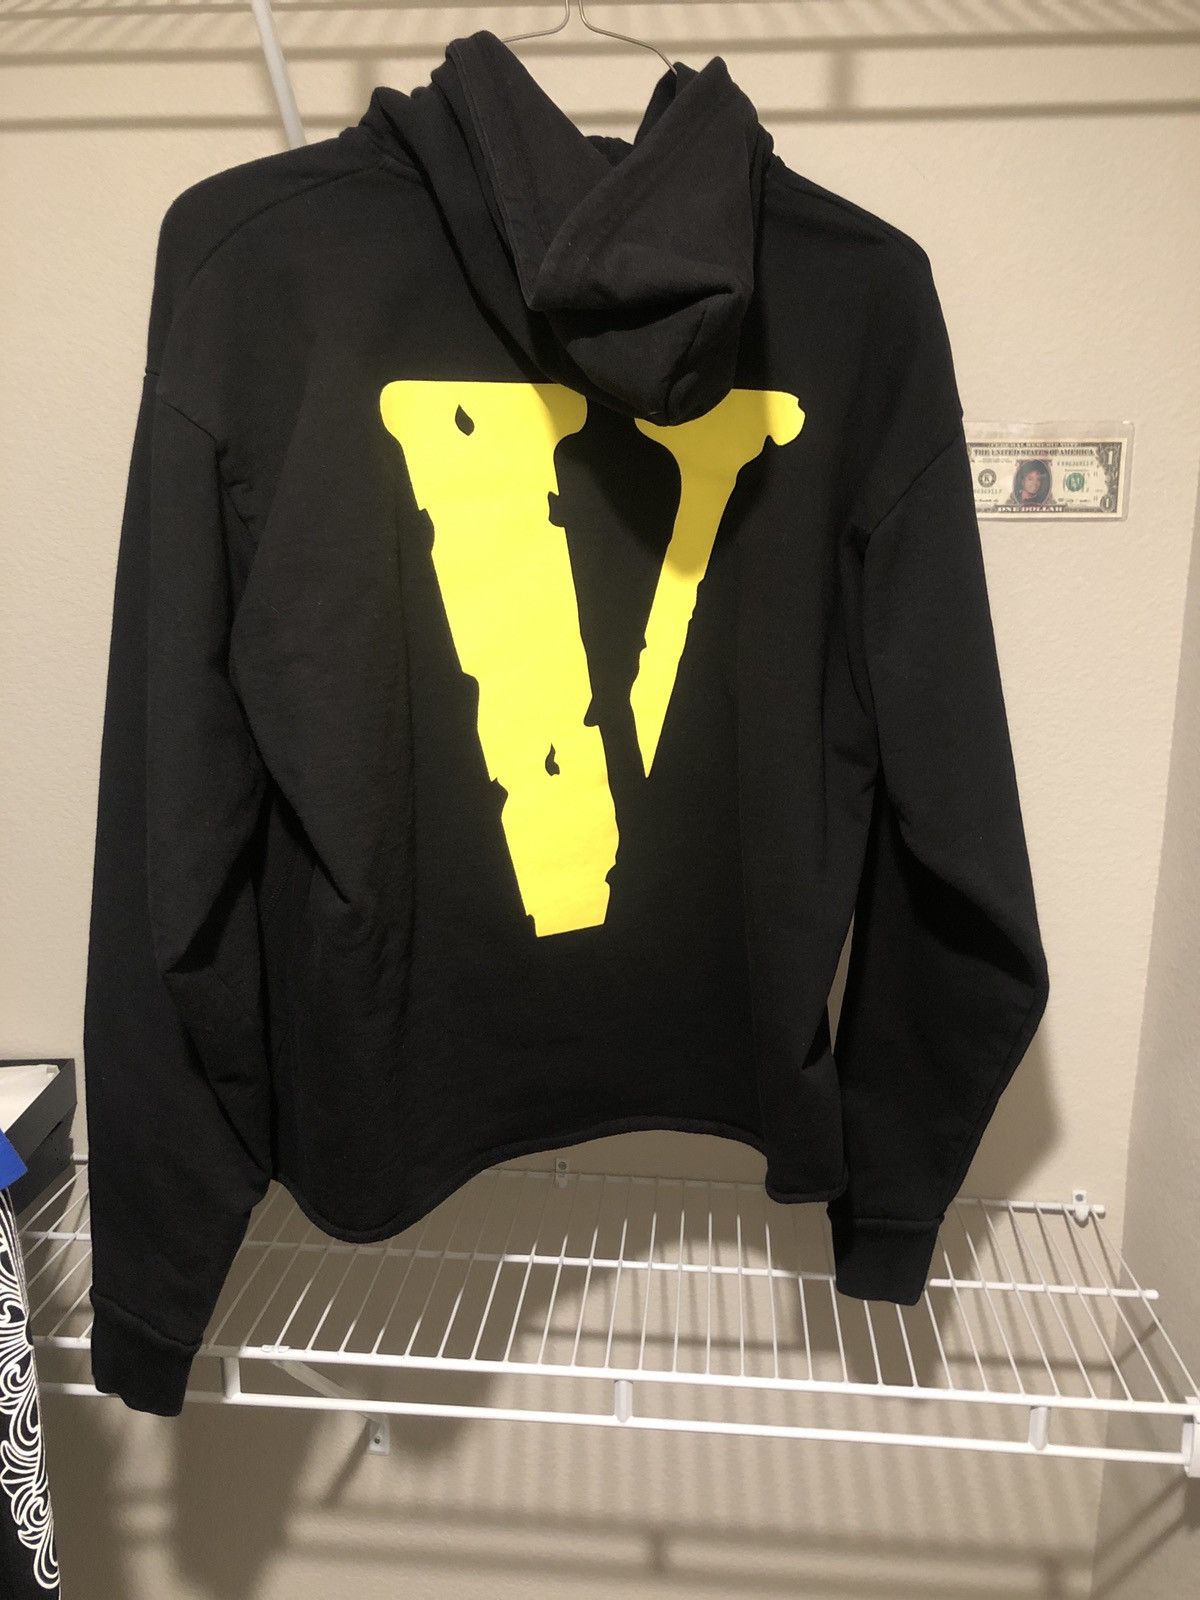 Vlone Smiley Face Hoodie Size US M / EU 48-50 / 2 - 2 Preview